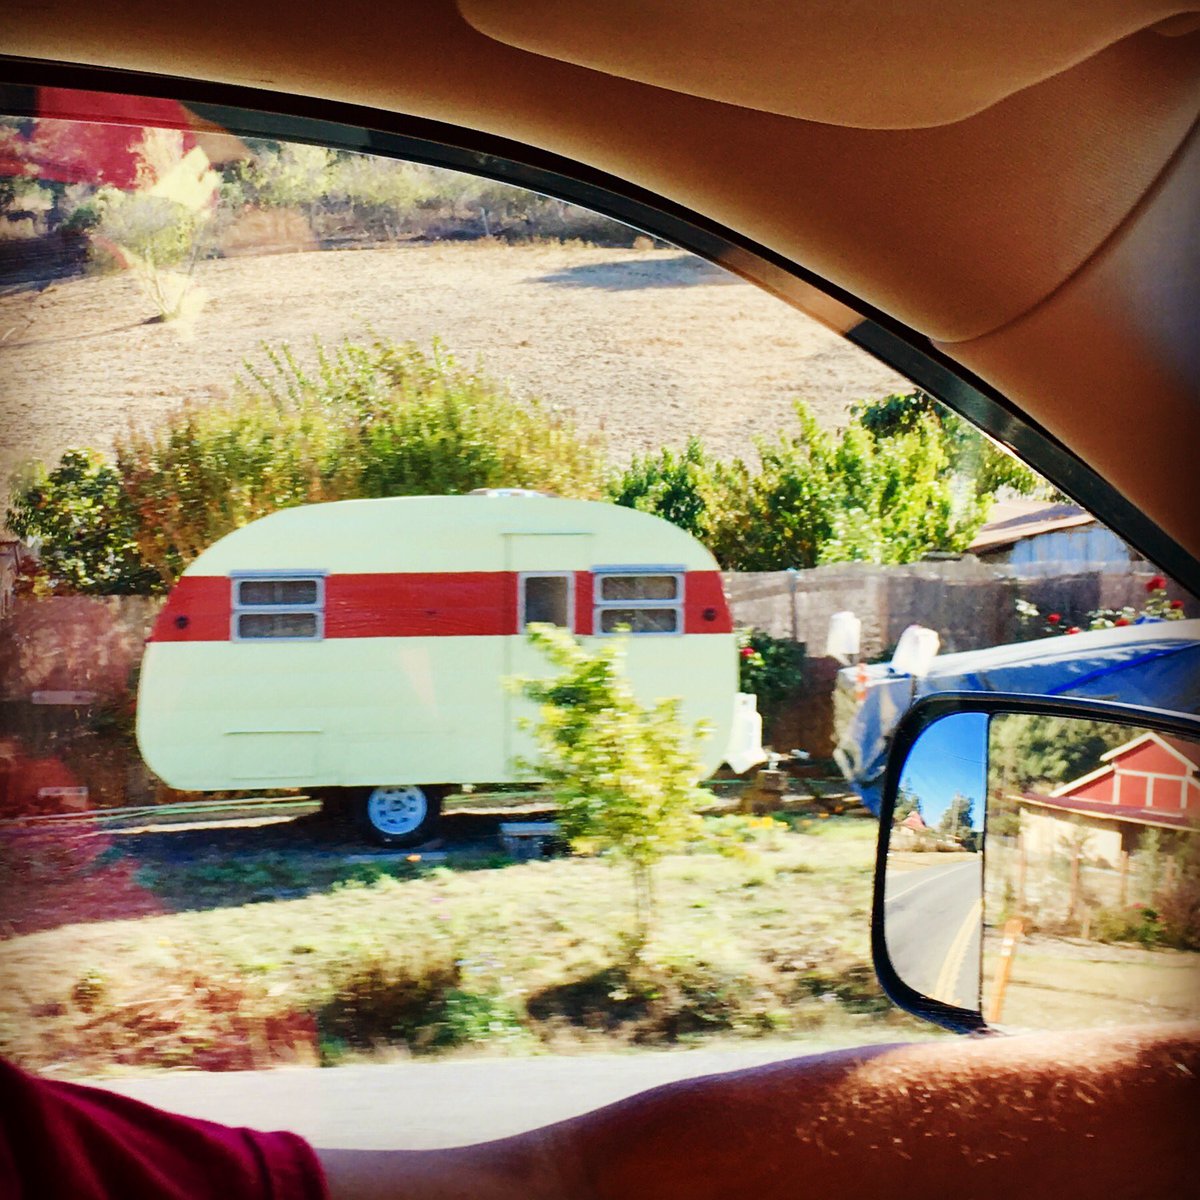 Has anyone else taken a quick photo of something along the side of the road while driving by....or is it just me? 😂😂 #funlovingrv #rvers #rvliving #smallcamper #smallcamperbiglife #cutecamper #drivebyphotos #fulltimervers #littlecamper #sideoftheroad